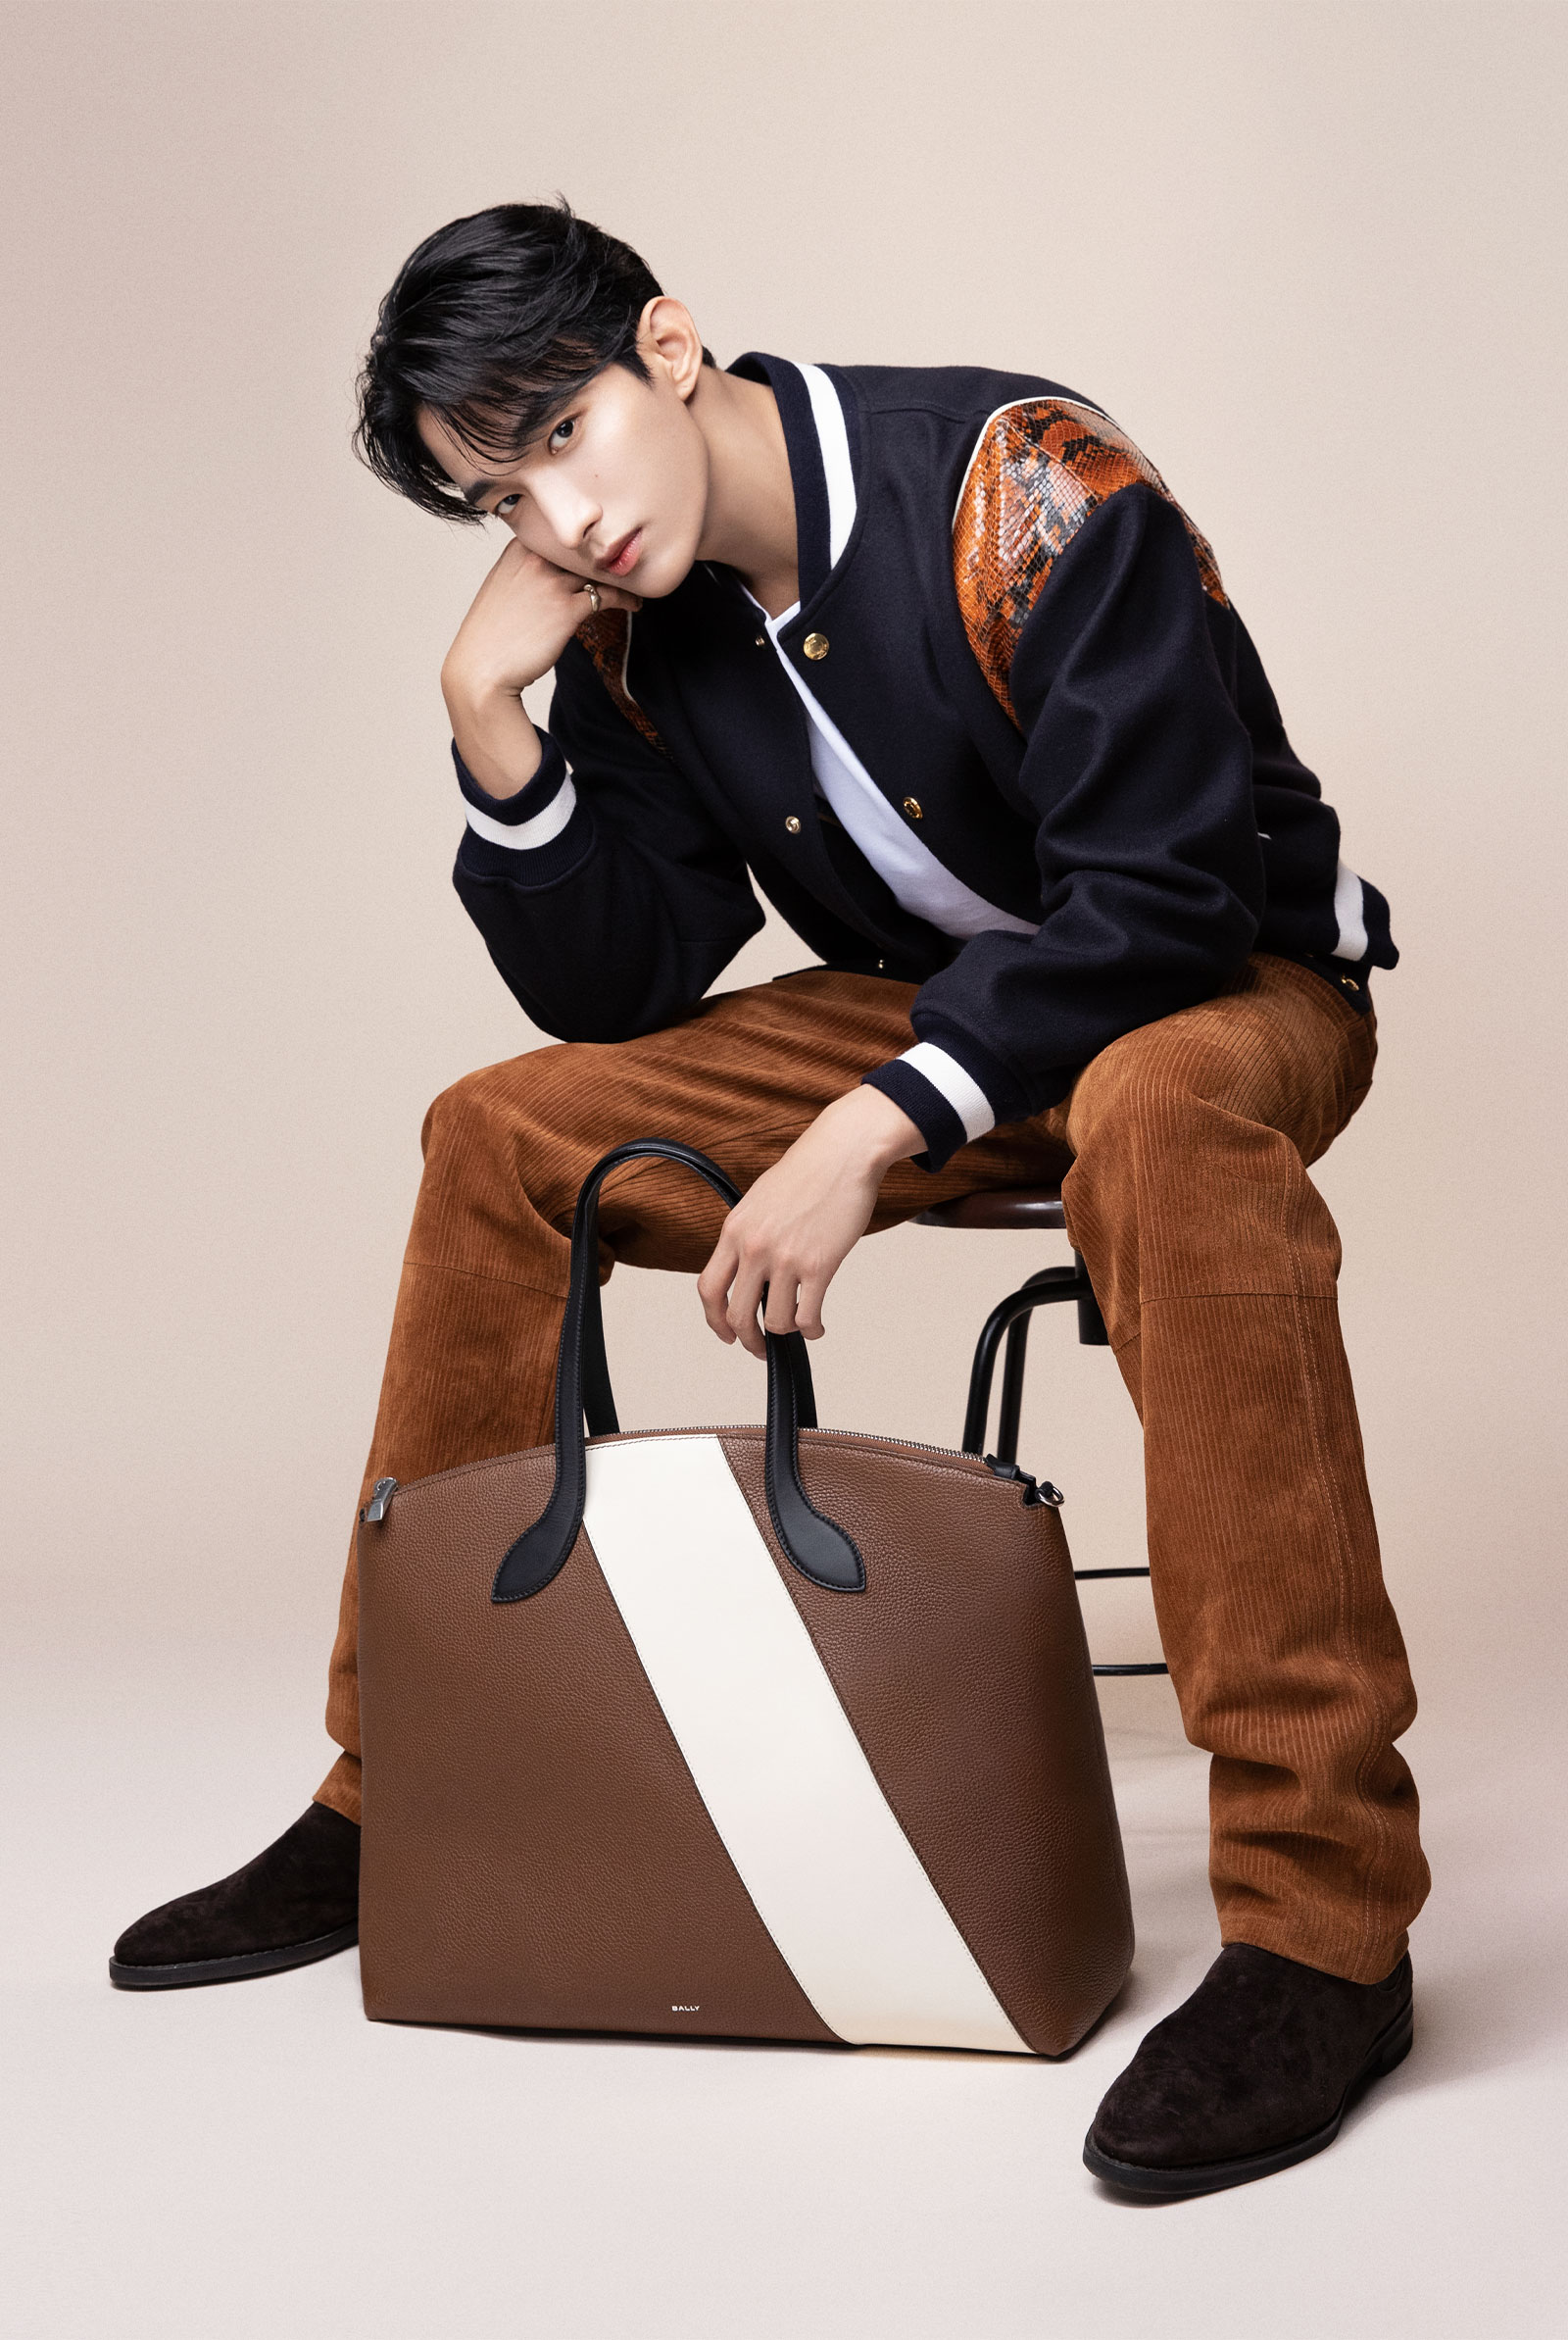 Bally released DK's new images donning brown corduroy pants and a varsity jacket adorned with a reptile-patterned trim